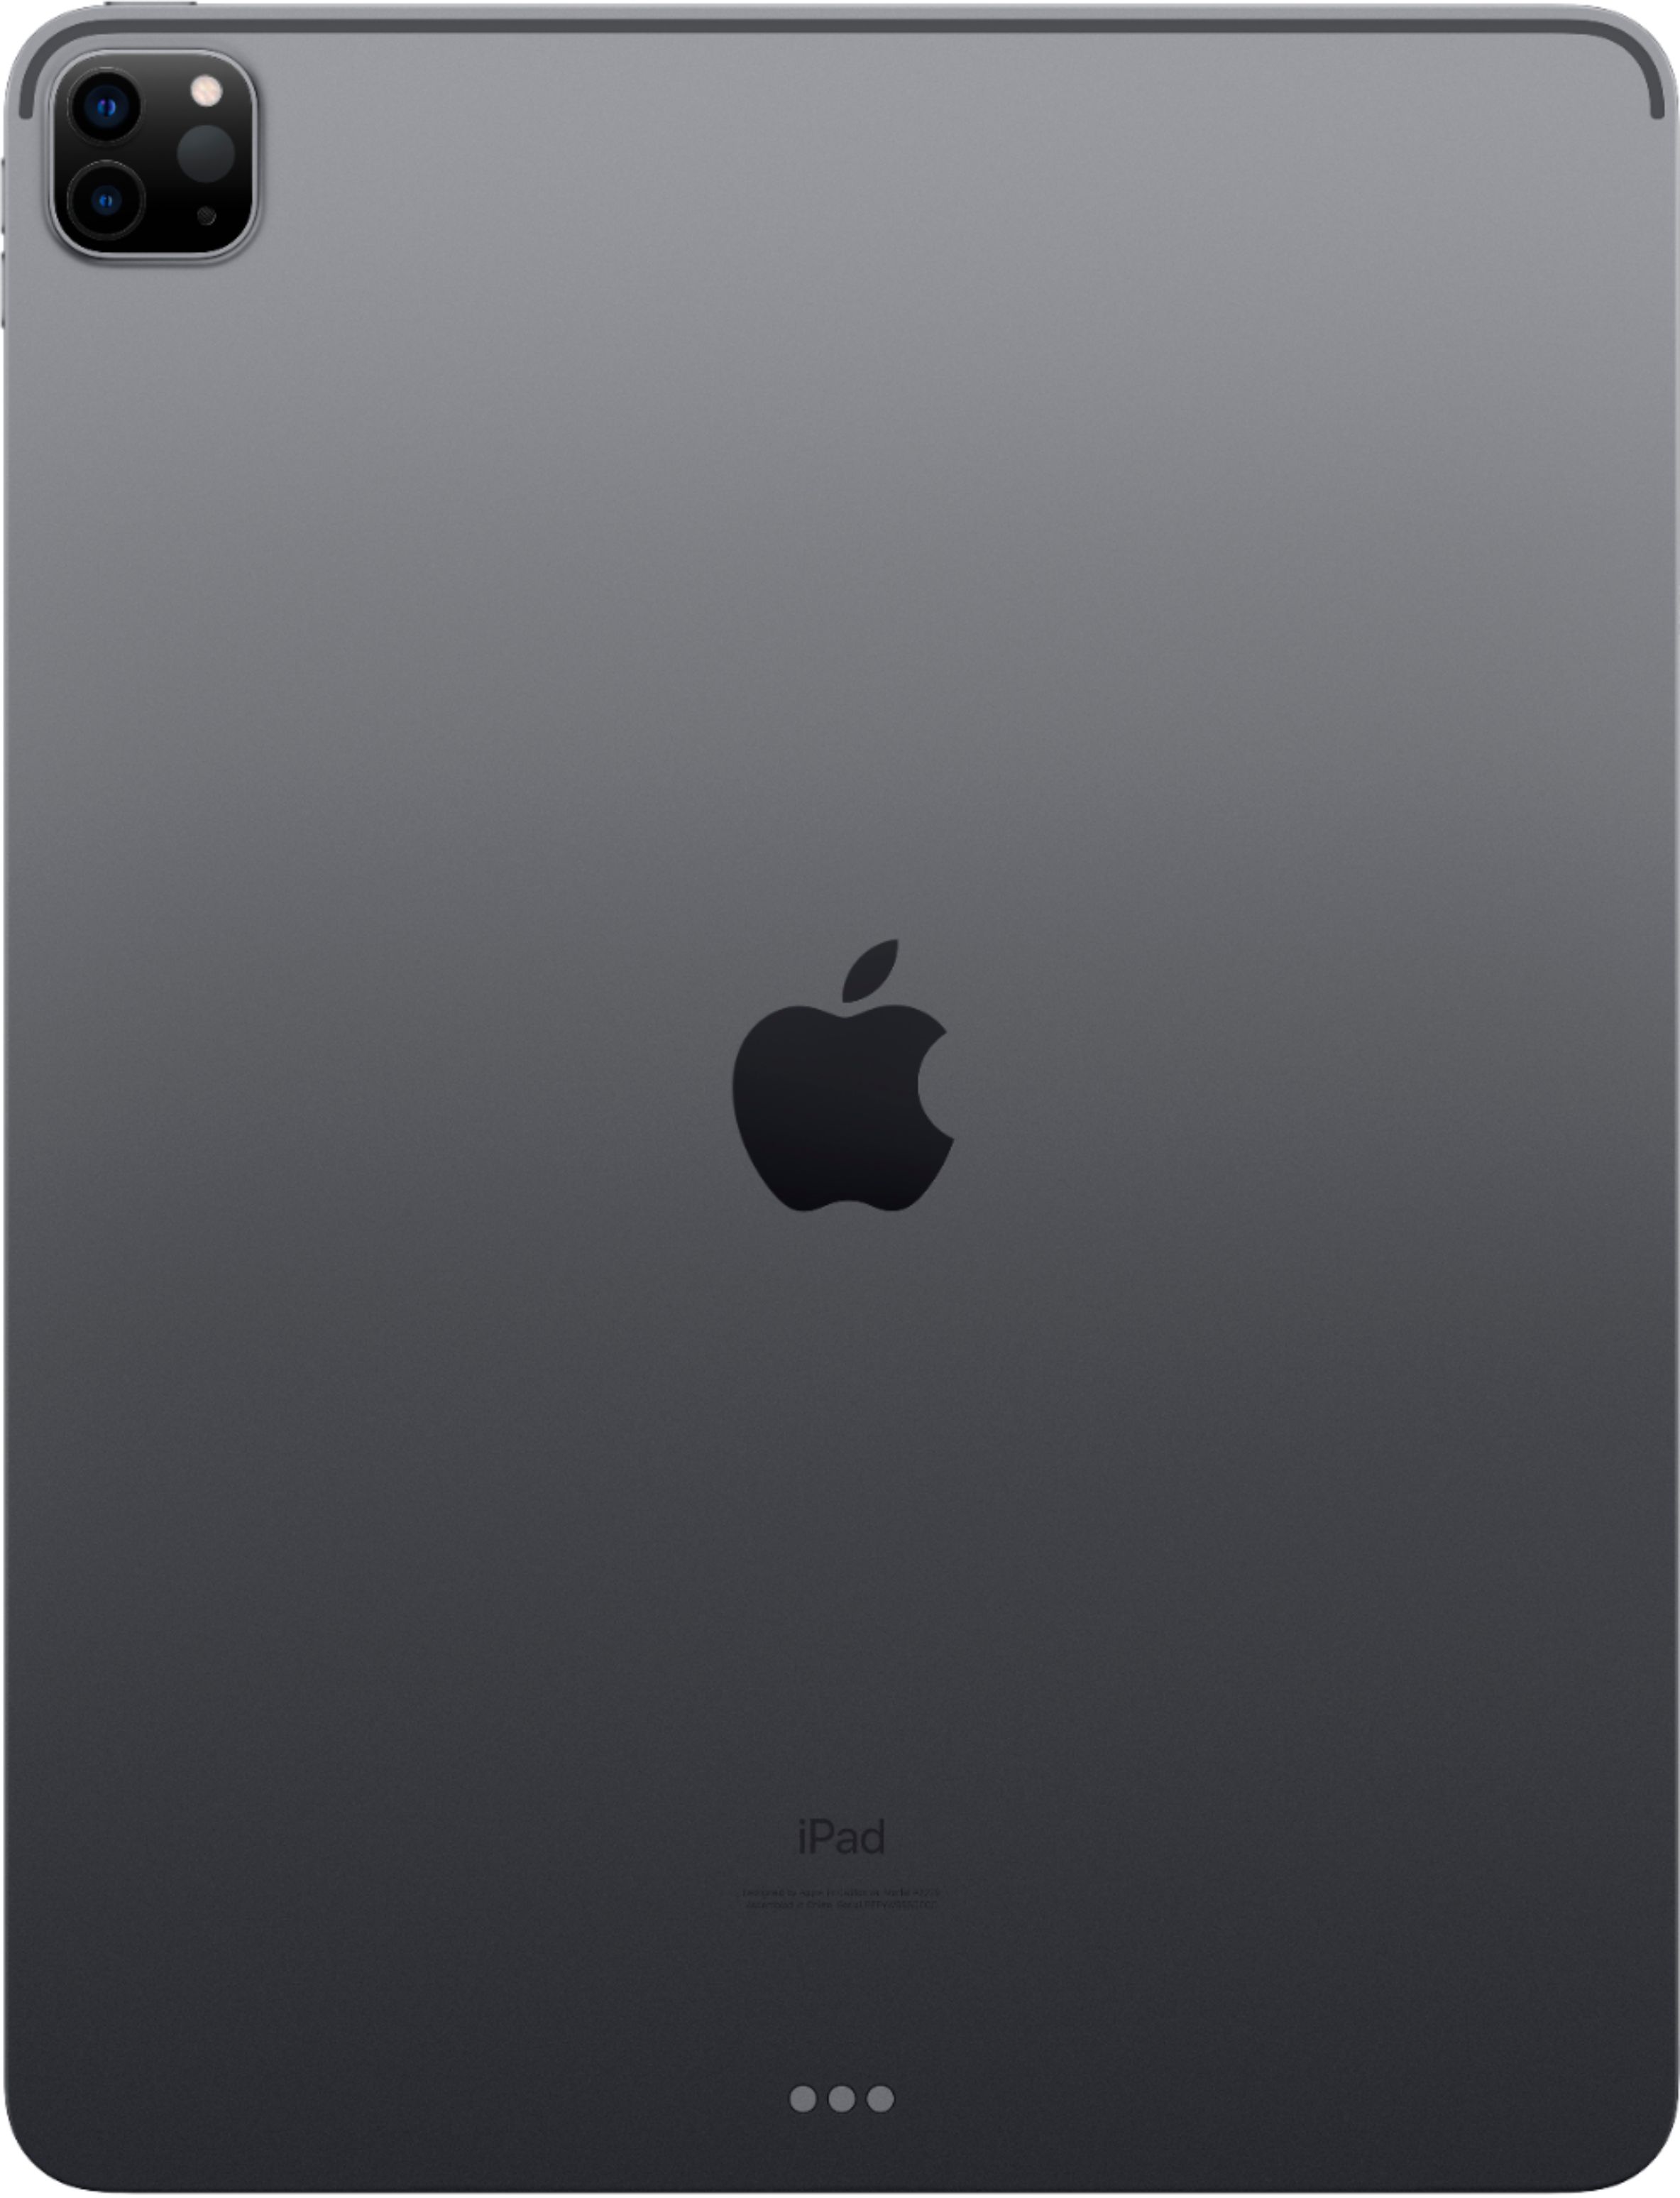 Best Buy: Apple 12.9-Inch iPad Pro (4th Generation) with Wi-Fi 